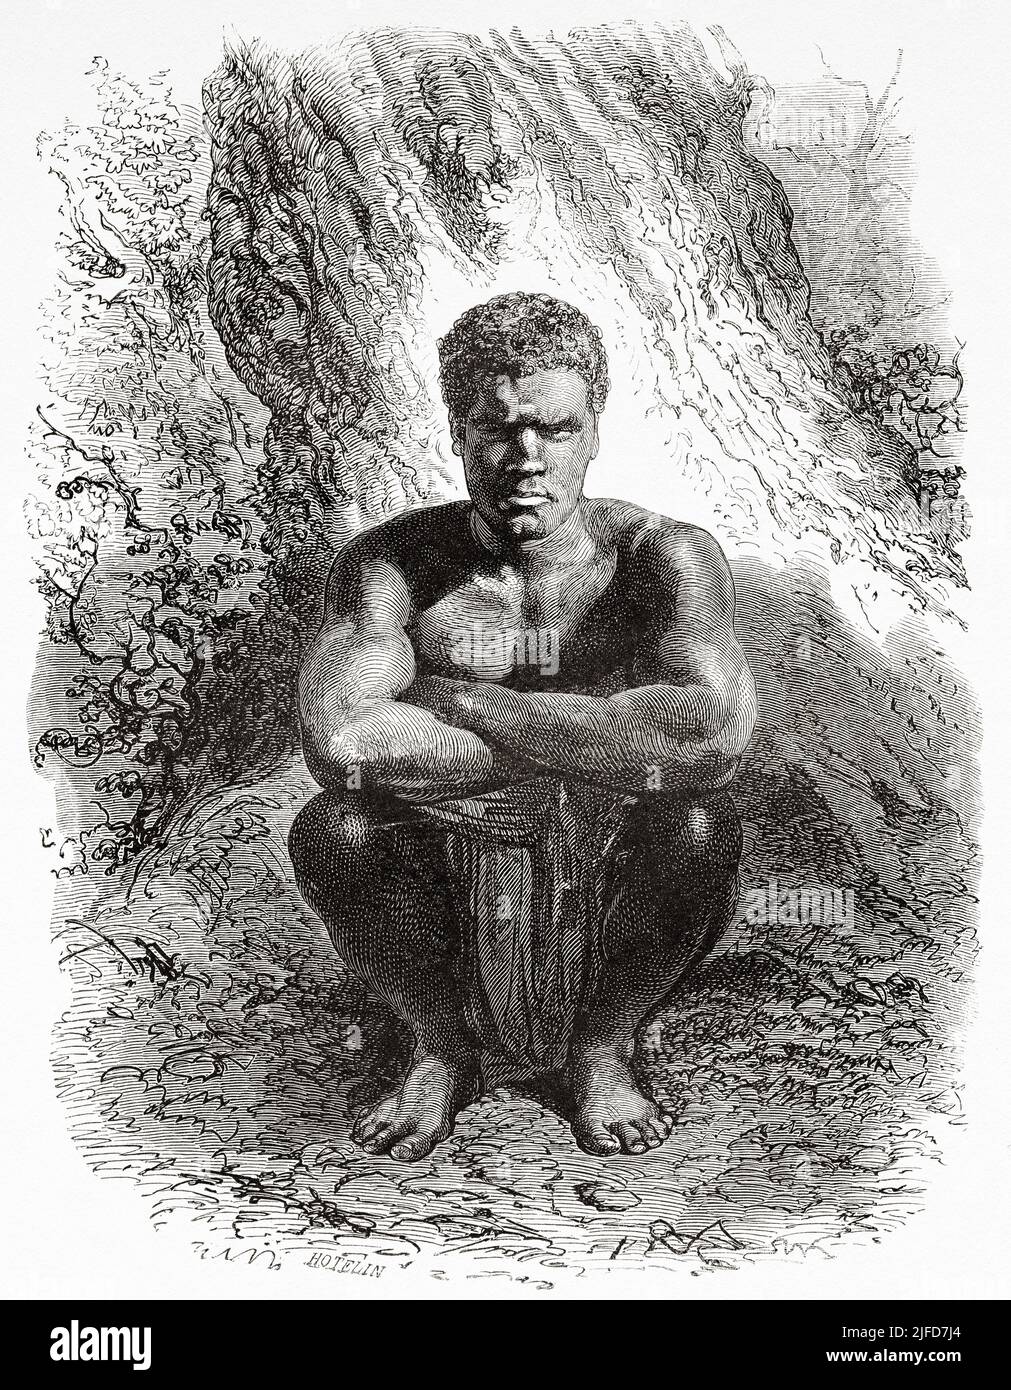 Native New Caledonian farmer, New Caledonia. Journey to New Caledonia by Jules Garnier 1863-1866 from Le Tour du Monde 1867 Stock Photo